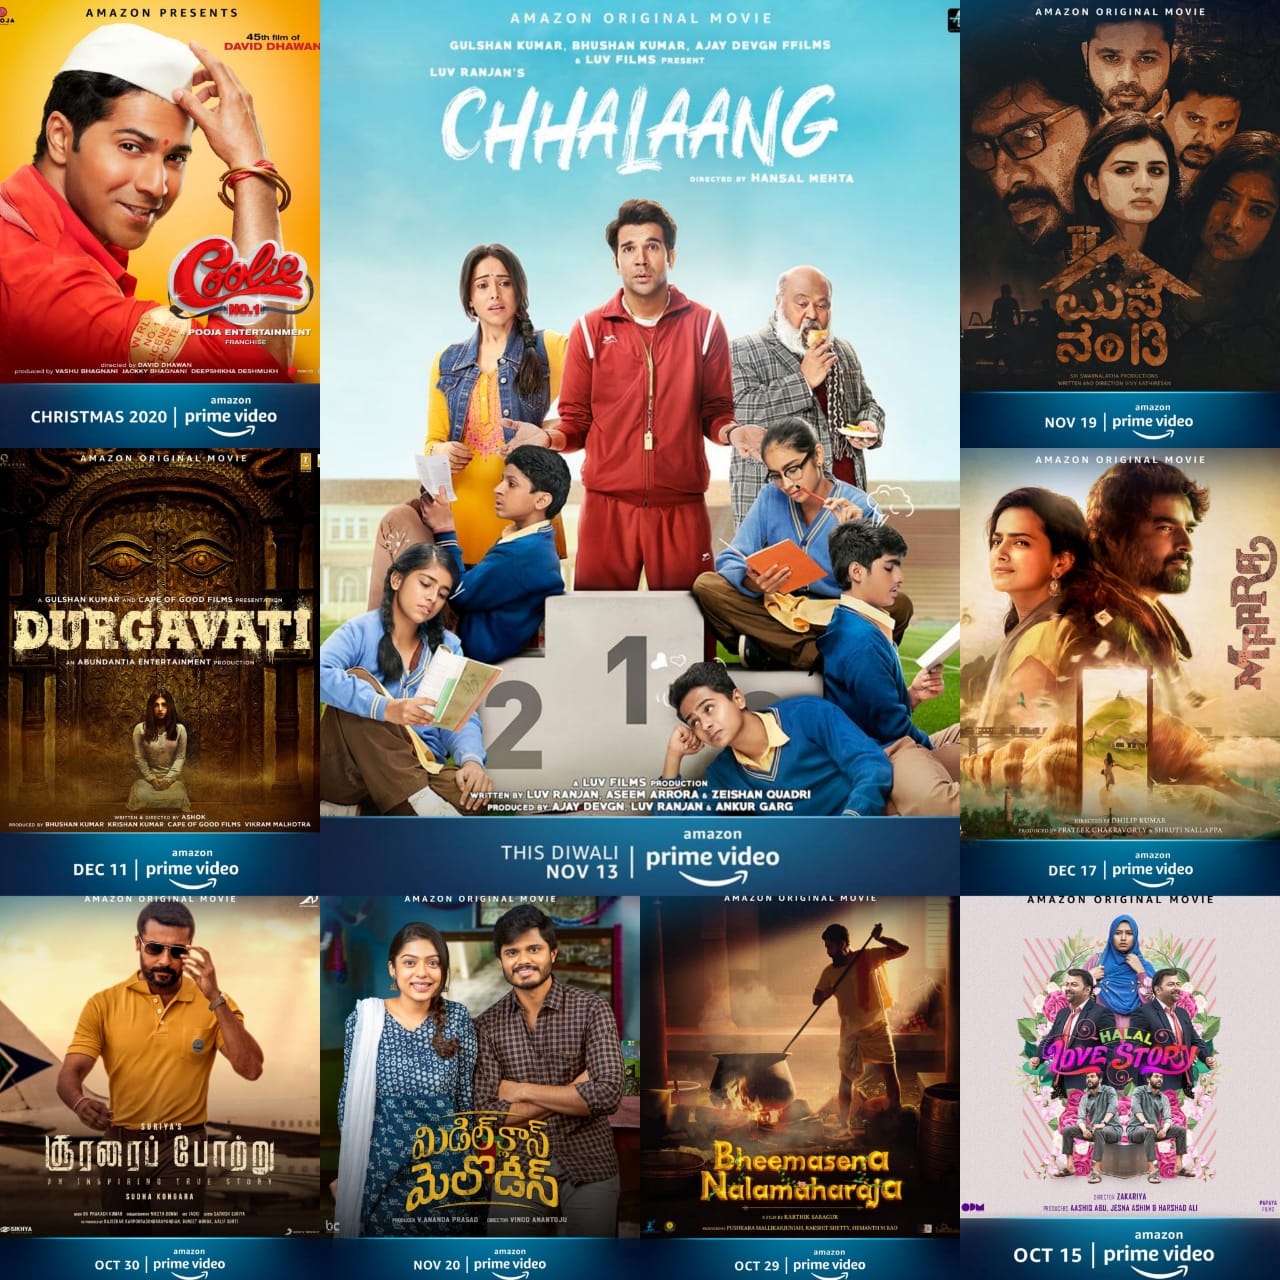 Amazon Prime Video to globally premiere 9 highly-anticipated movies across 5 Indian languages directly on its service